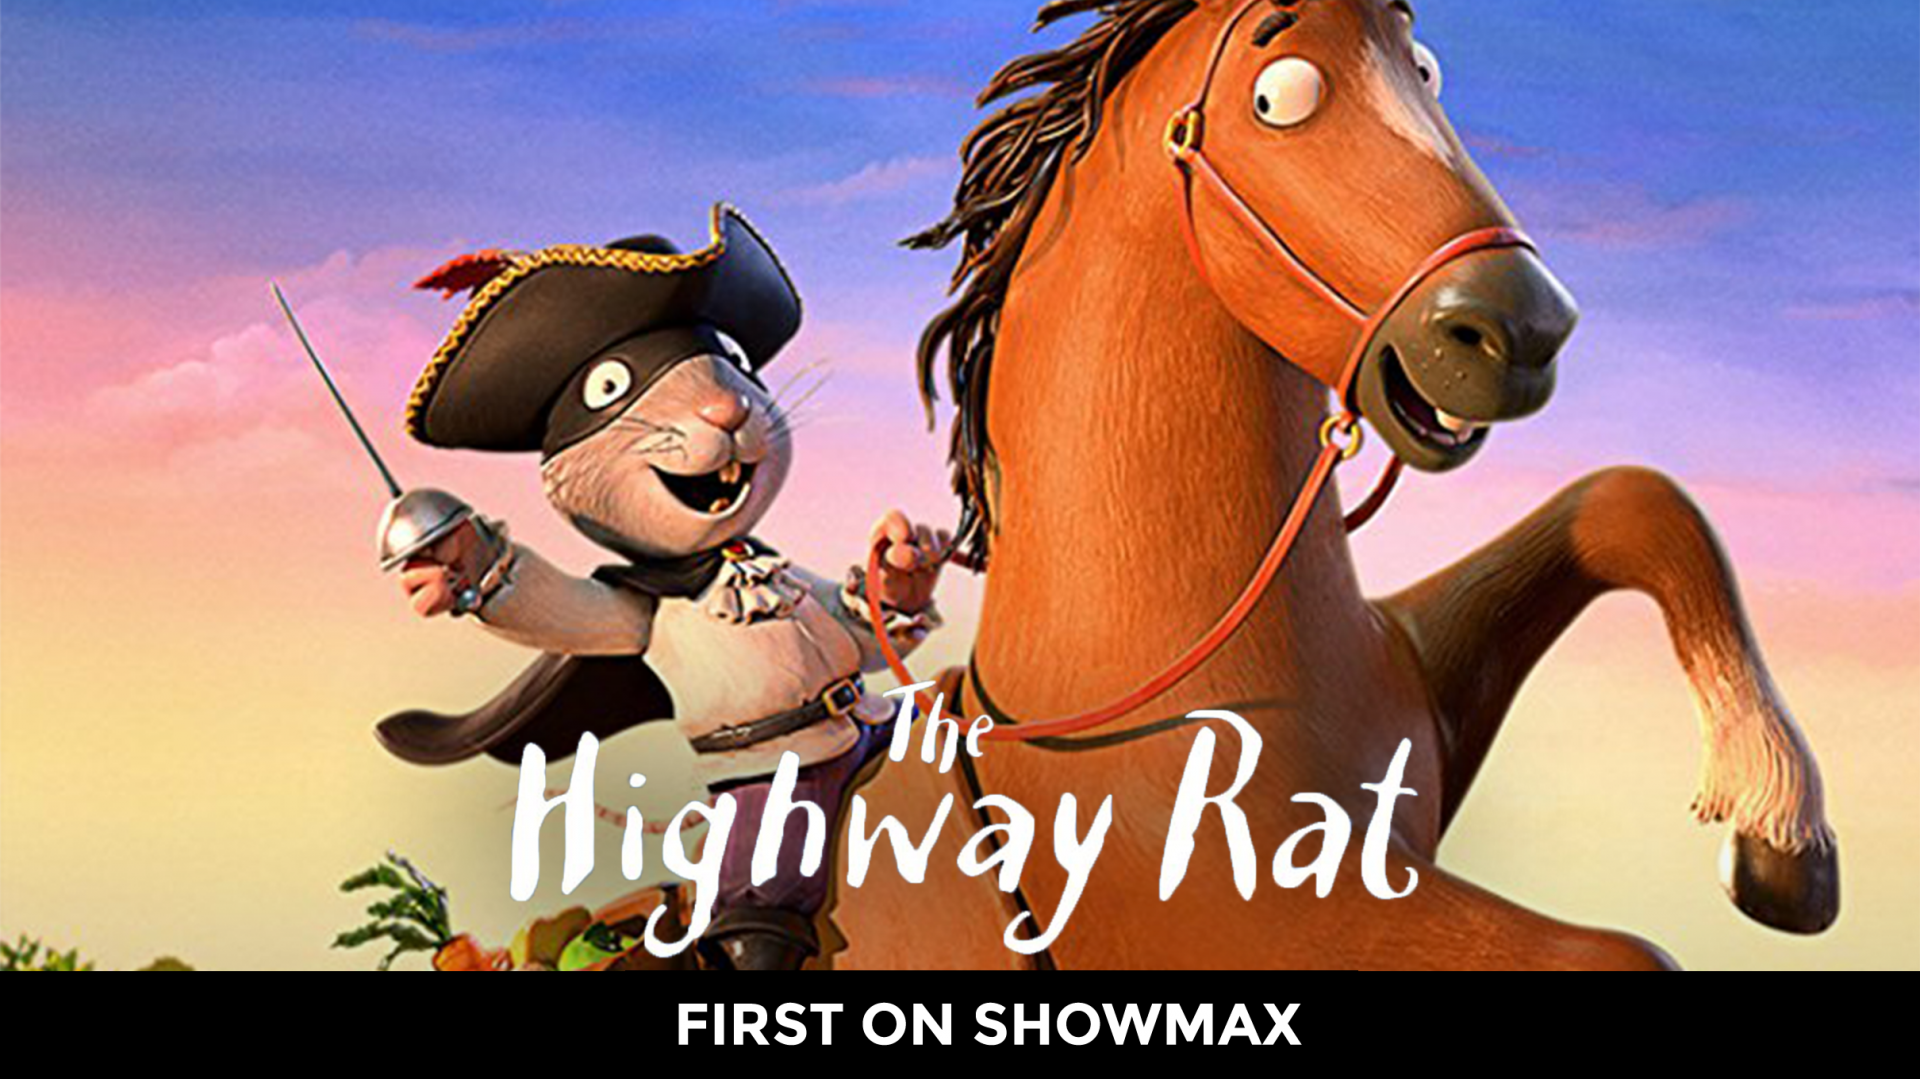 The Highway Rat is first and only on Showmax in Africa